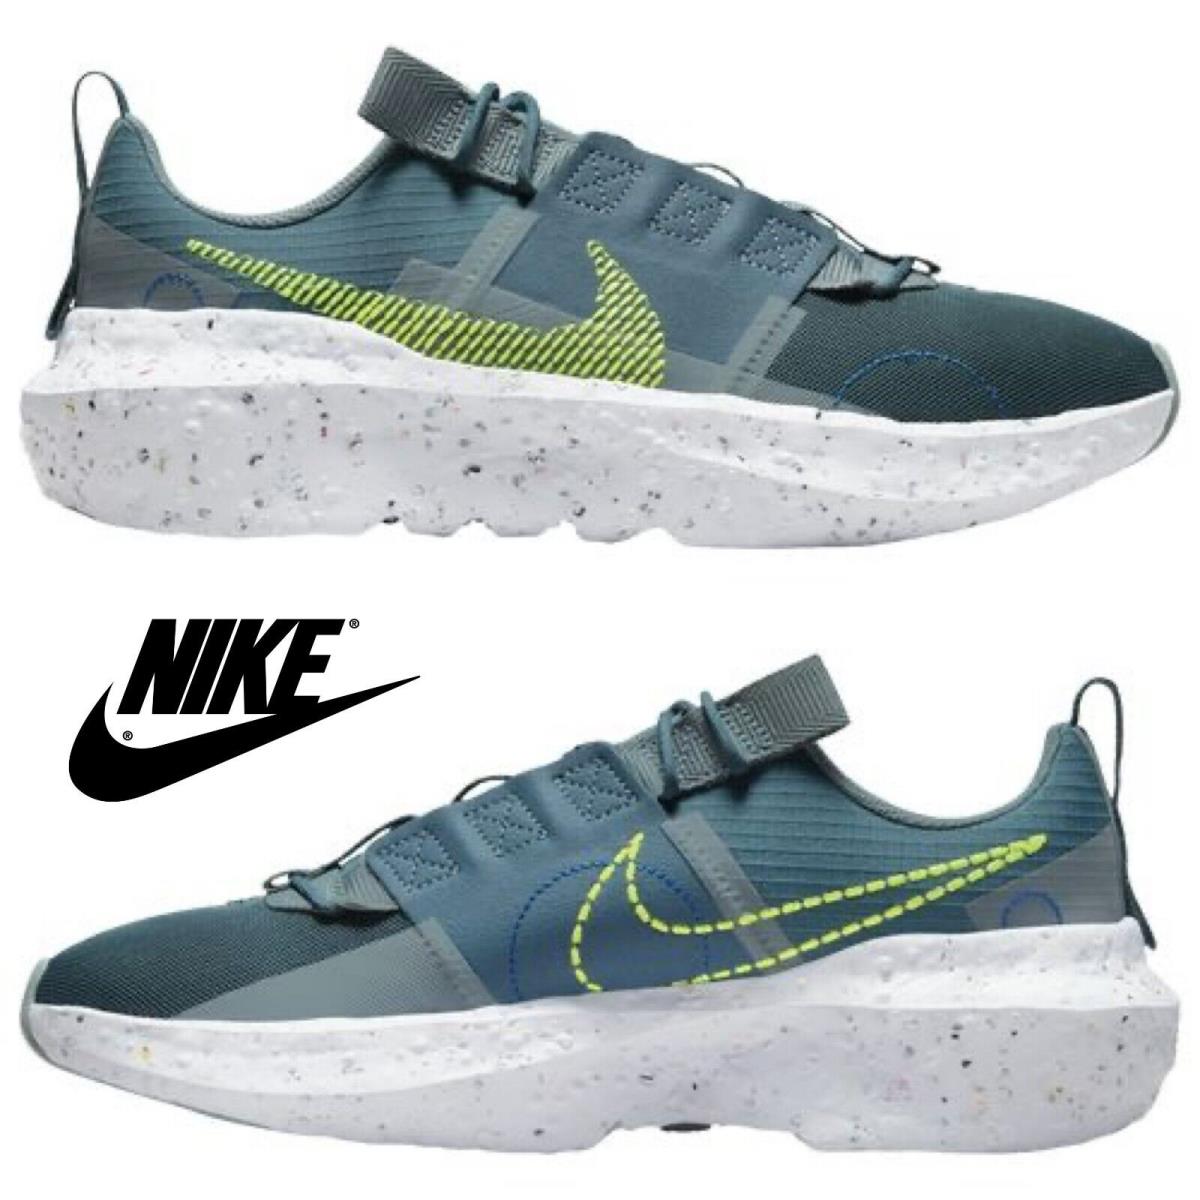 Nike Men`s Crater Impact Sneakers Training Athletic Sport Casual Shoes Geen